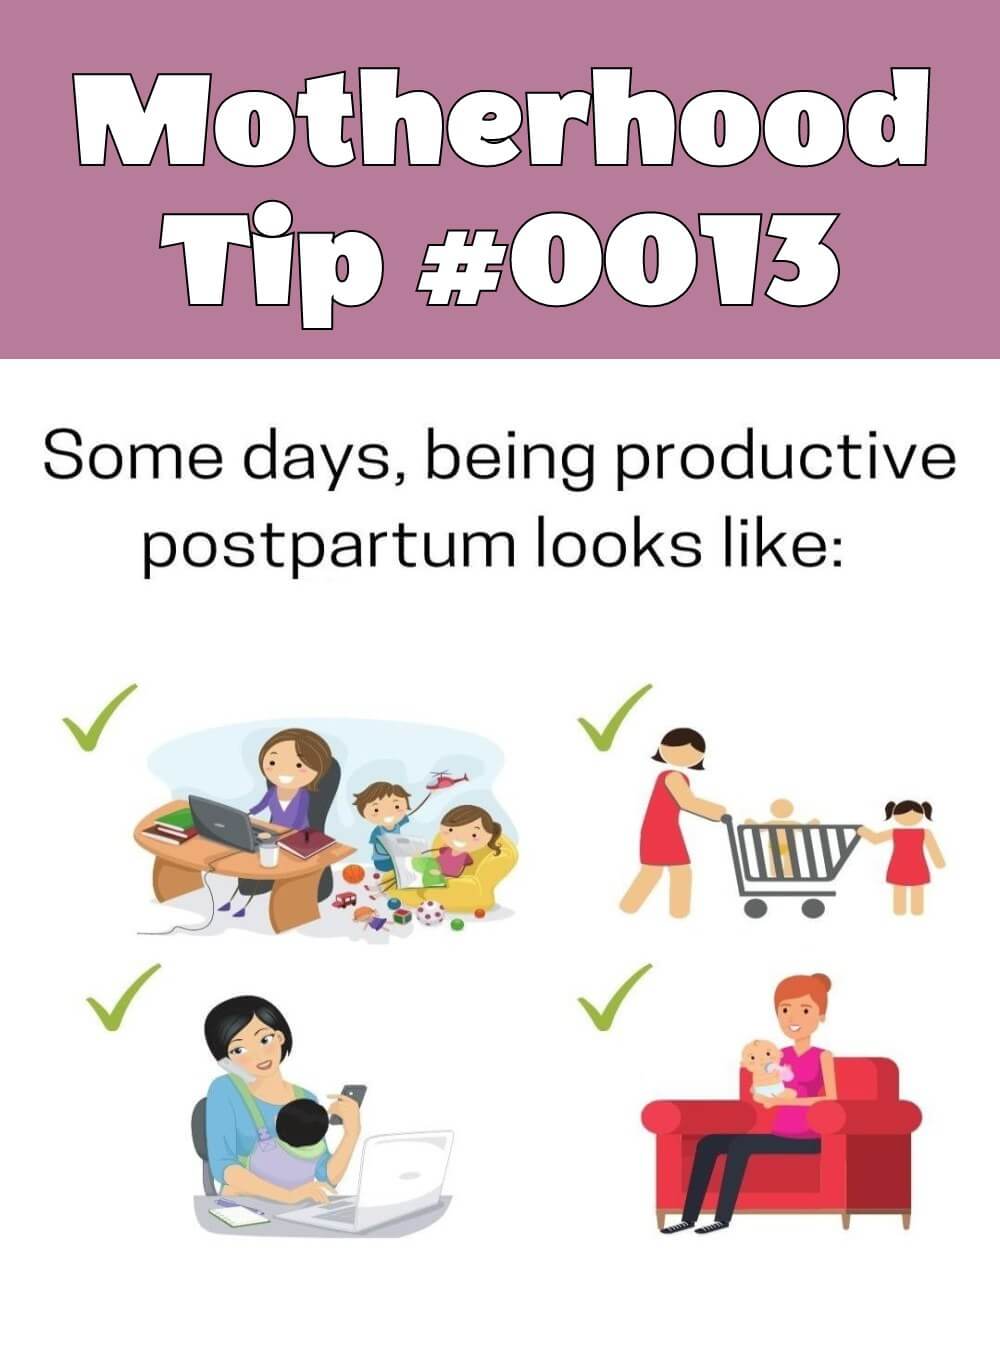 Parenting and Pregnancy Infographic | Motherhood Tip #0013